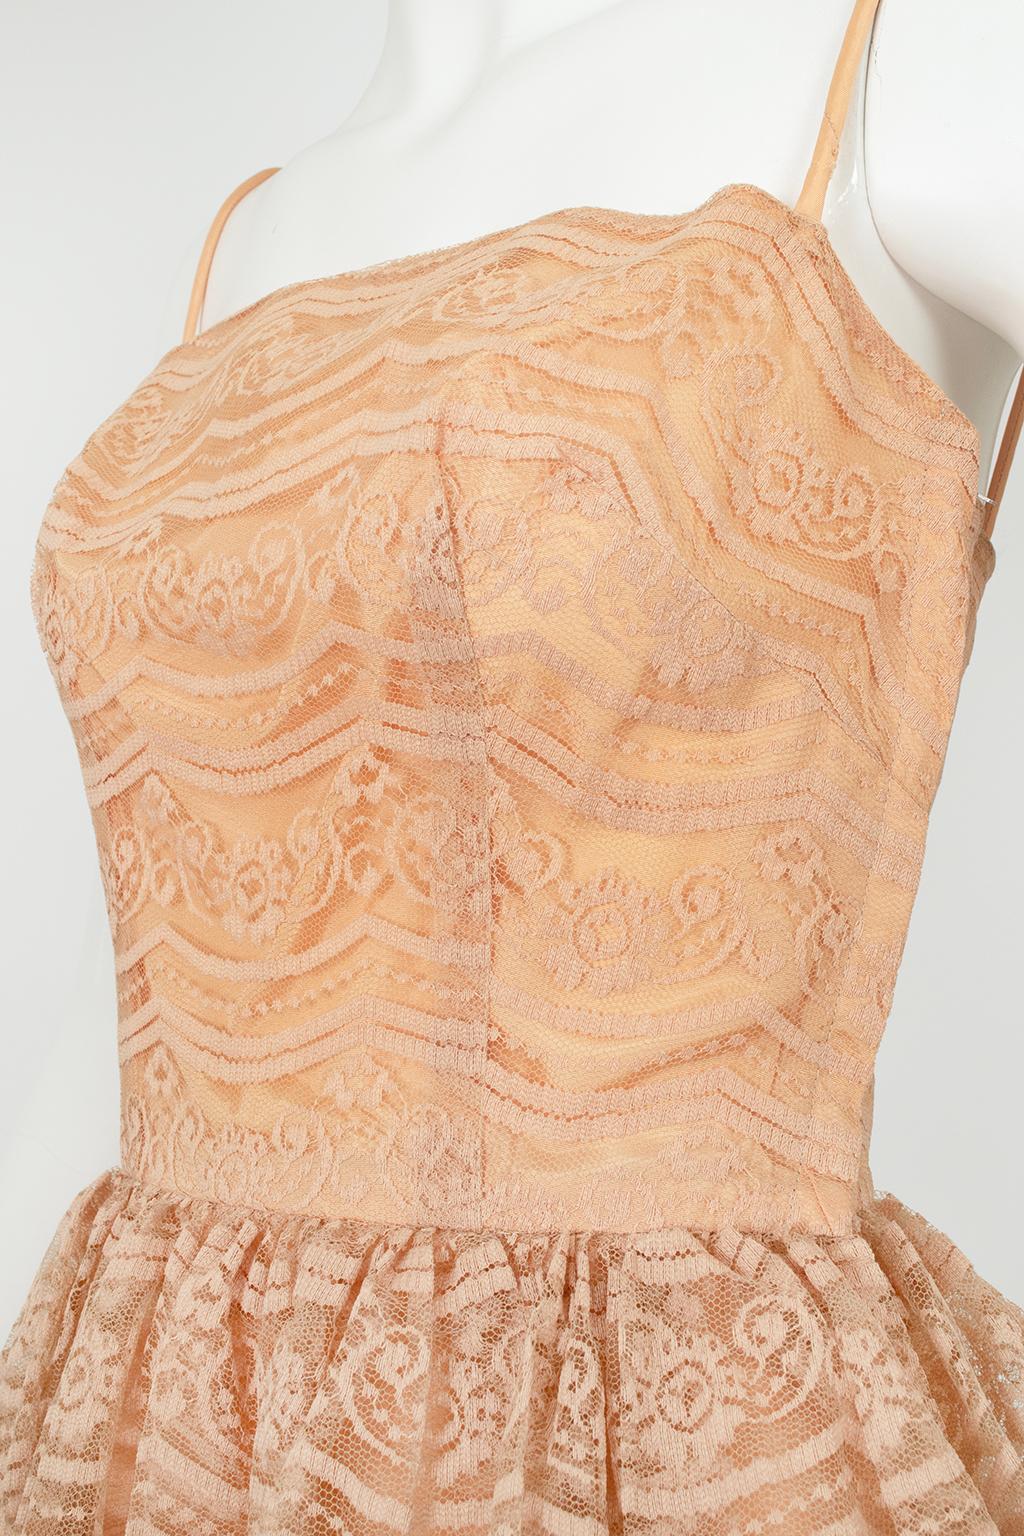 Nude Lace Lampshade Funnel Skirt Cocktail Party Dress – XS, 1960s For Sale 3